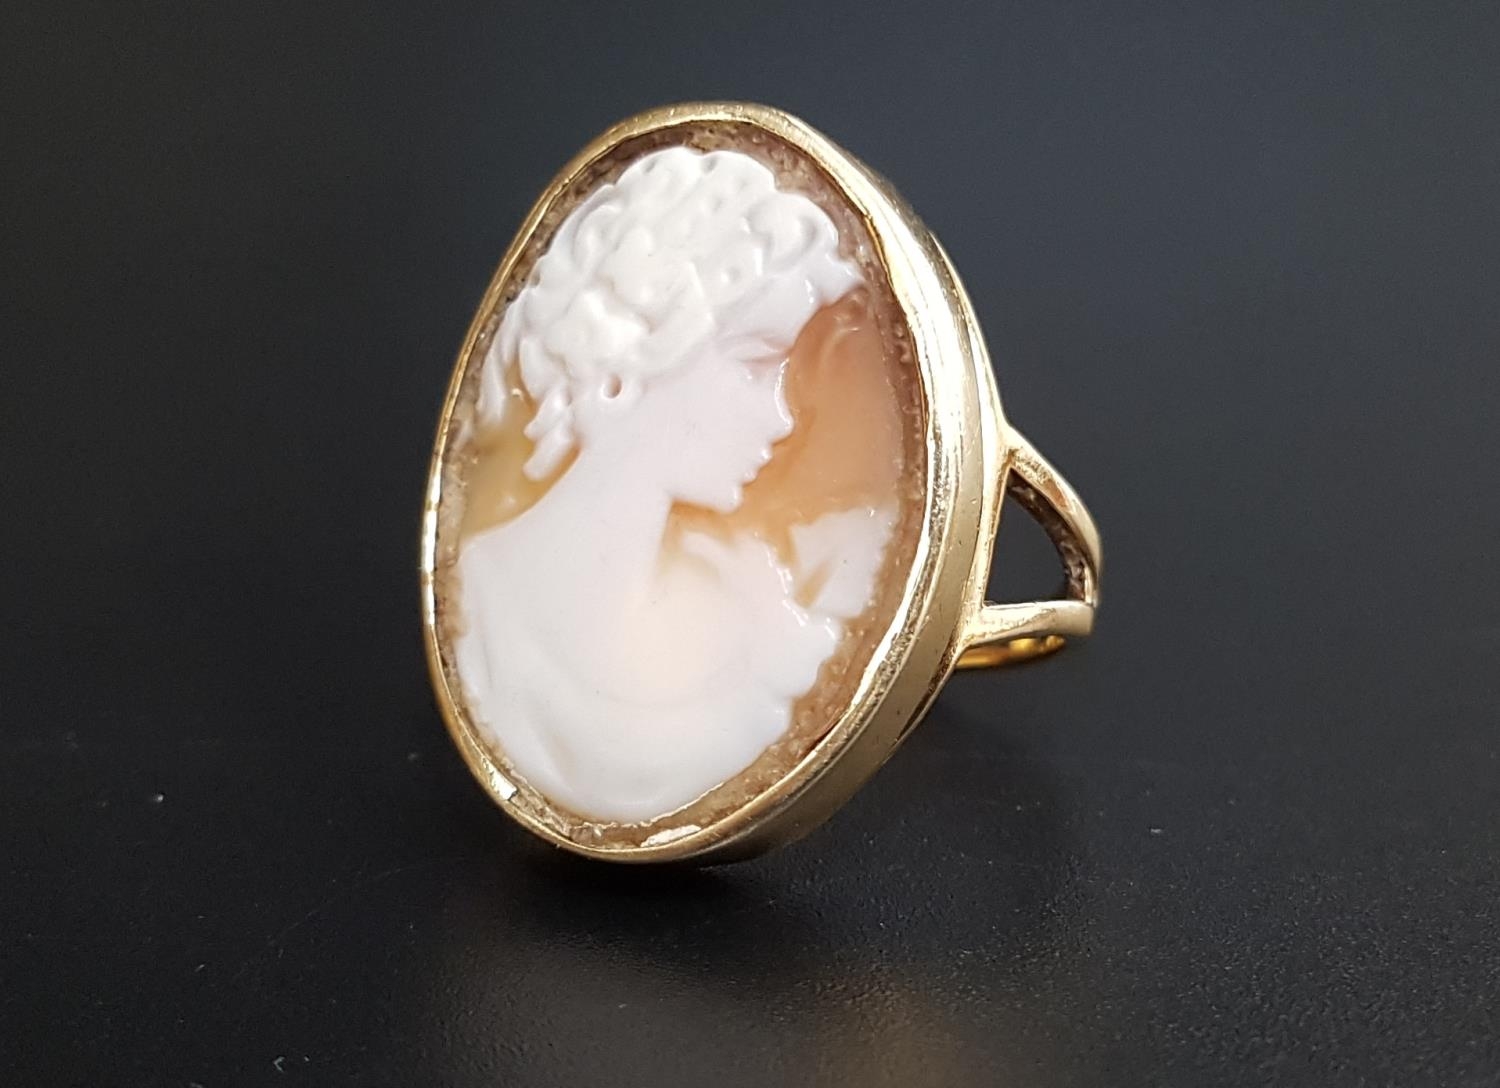 LARGE CAMEO DRESS RING the oval cameo depicting a female bust in profile, on nine carat gold